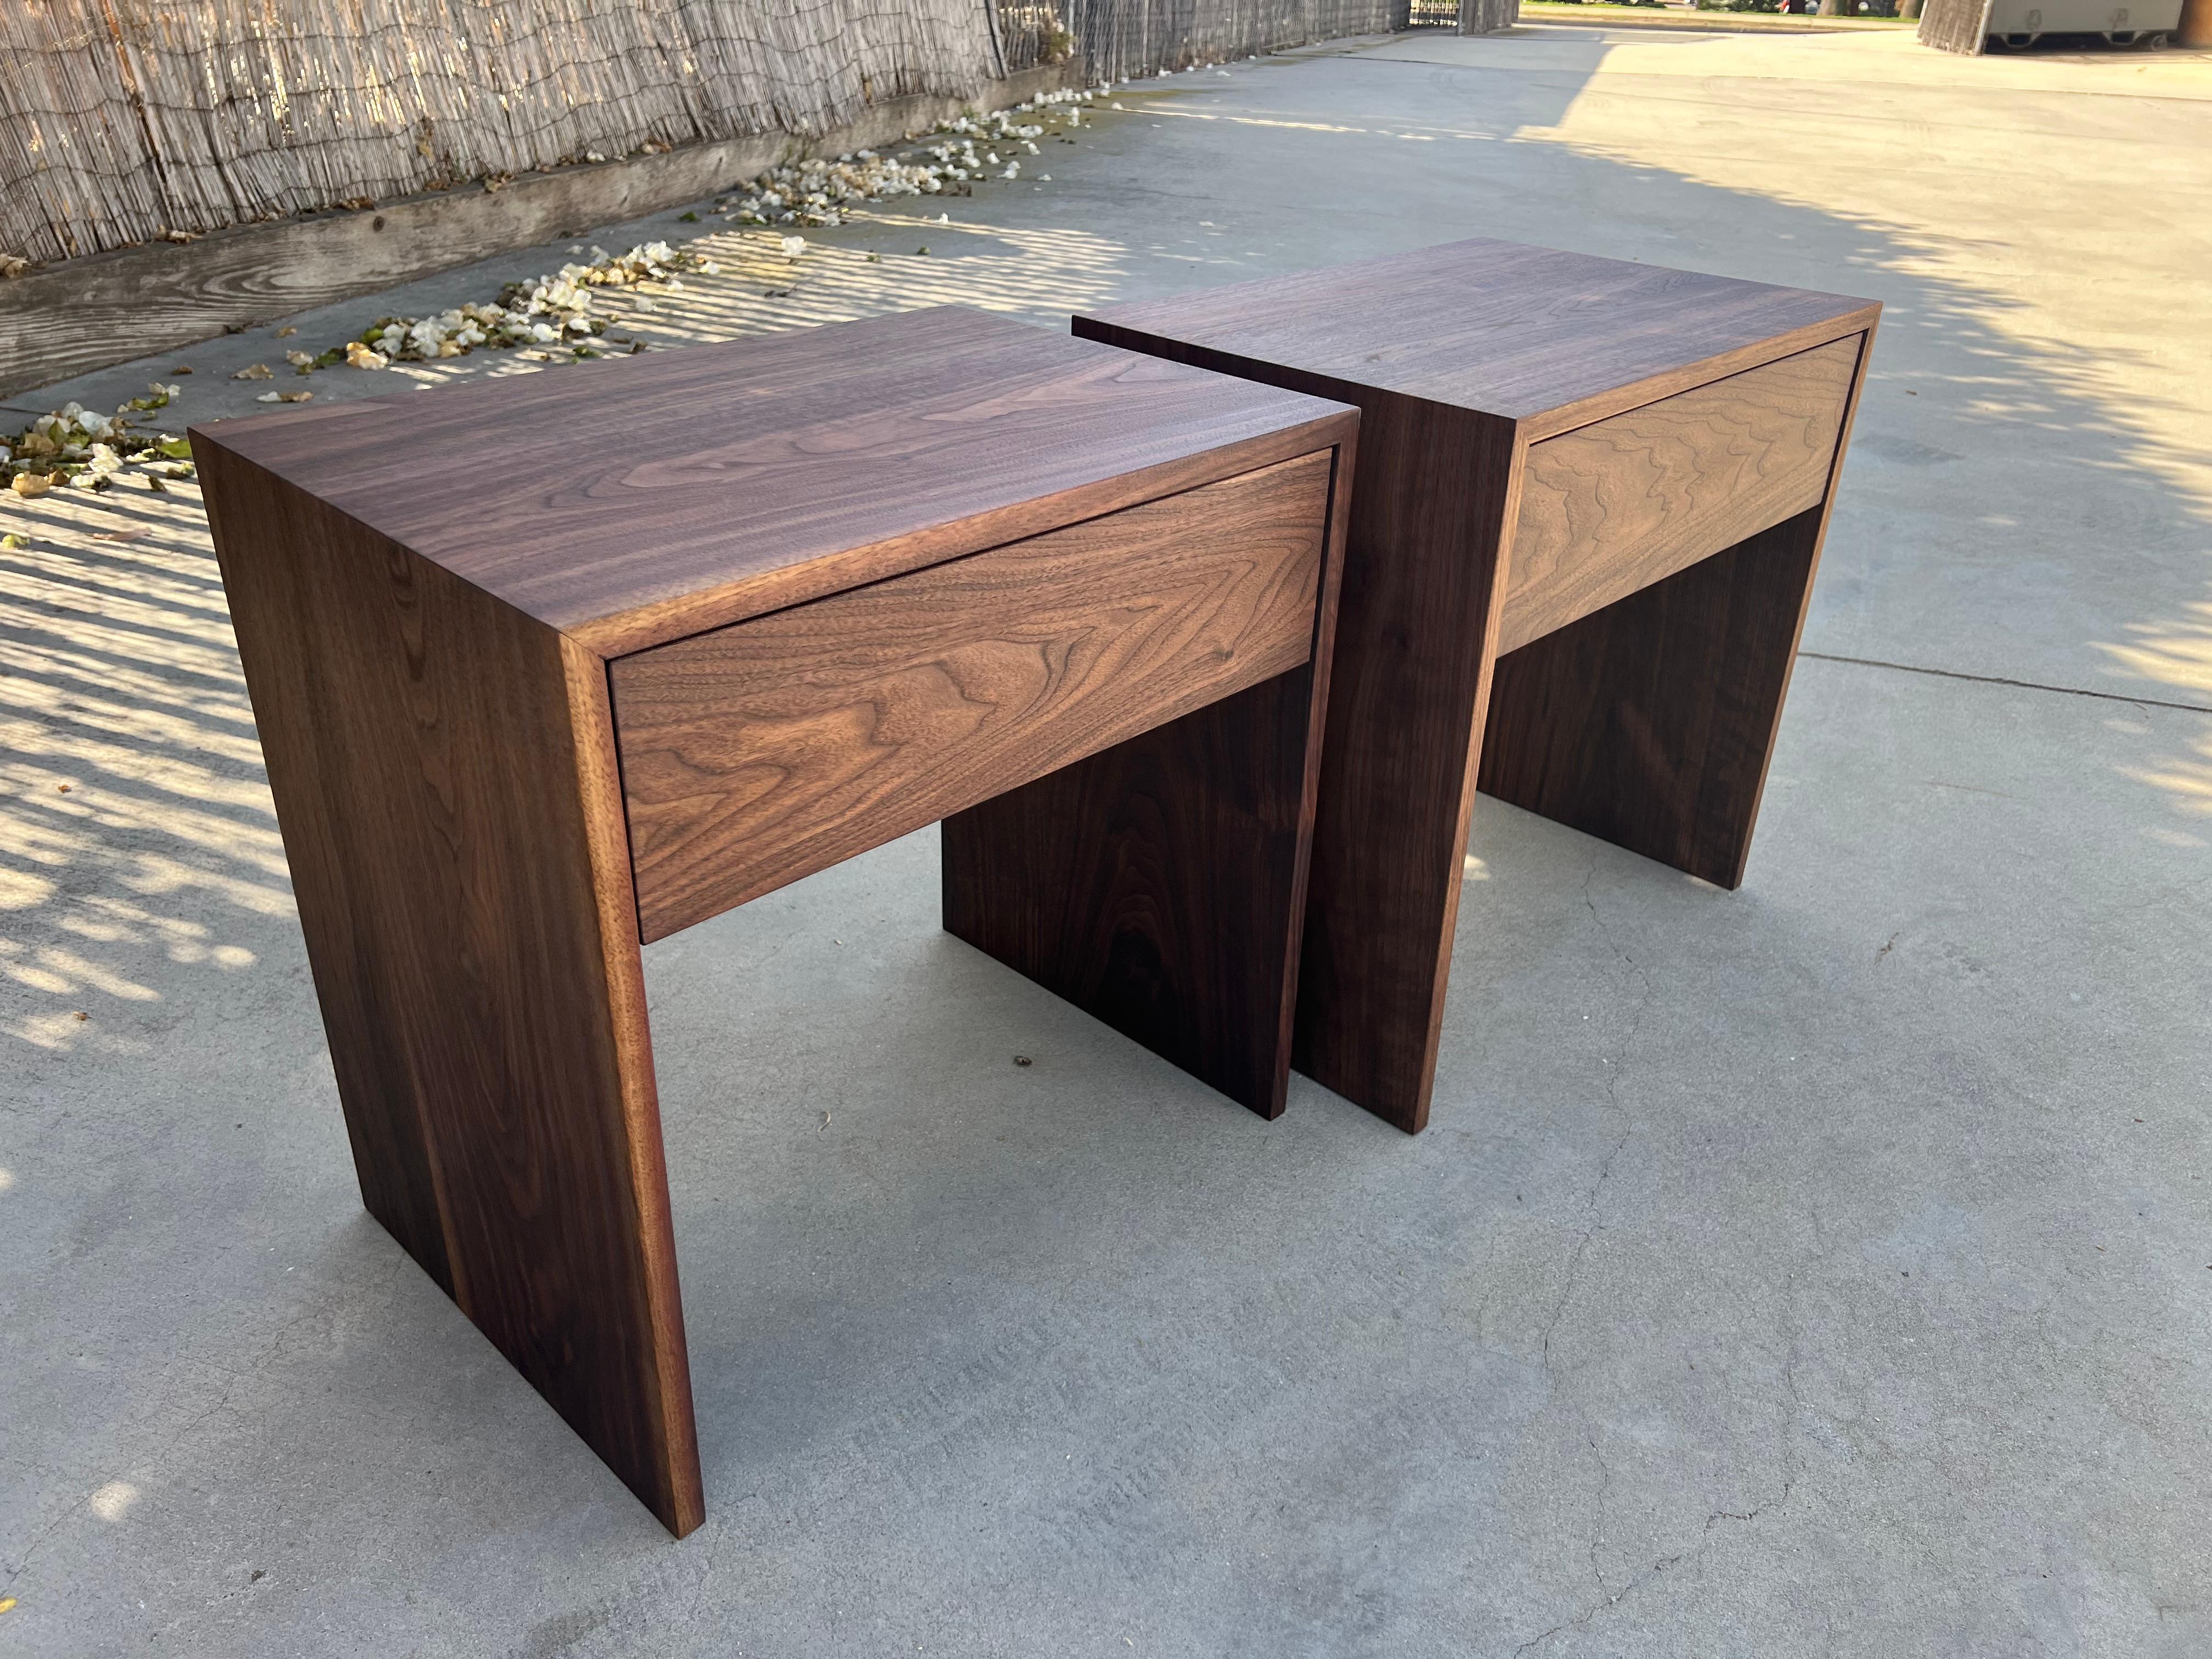 COAST  set in Walnut -
Price for the set - consists of 2 mirror image nightstands

Solid Walnut case and drawer fronts. Solid maple drawer boxes with finger joint joinery. Hand made, mortise & tenon joinery. Blum Tandem under mount  soft close